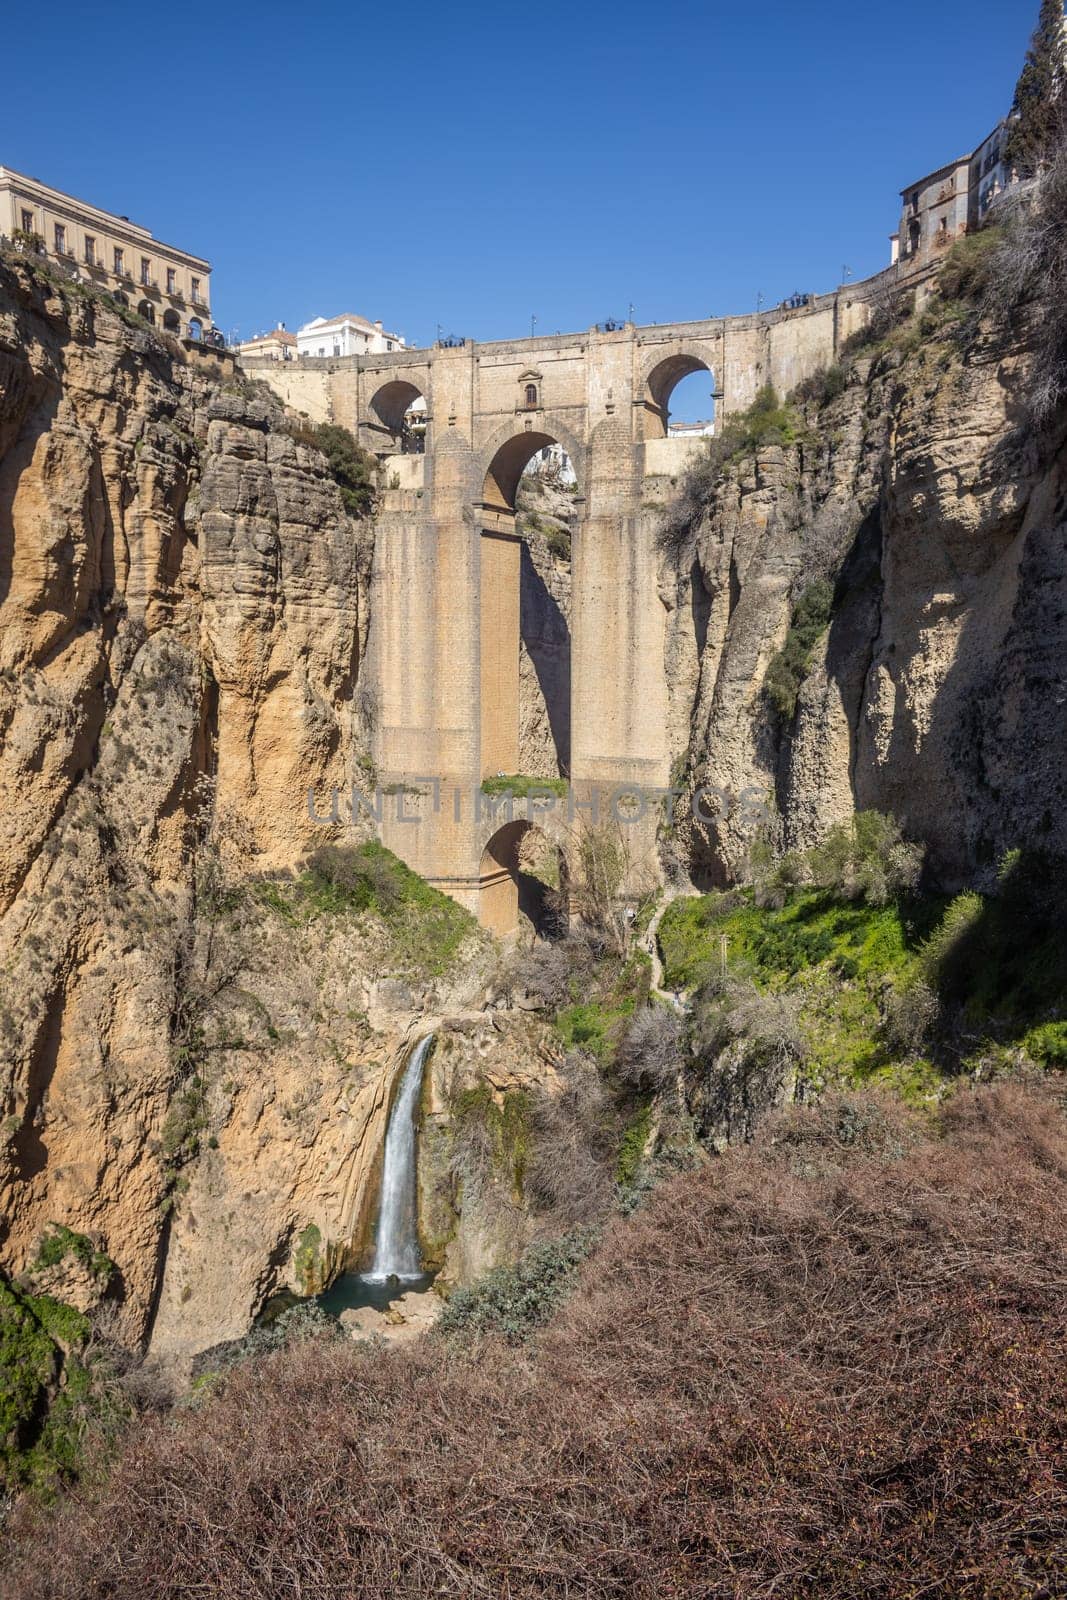 Panoramic view of Puente Nuevo over the Tagus gorge, Ronda, Spain.